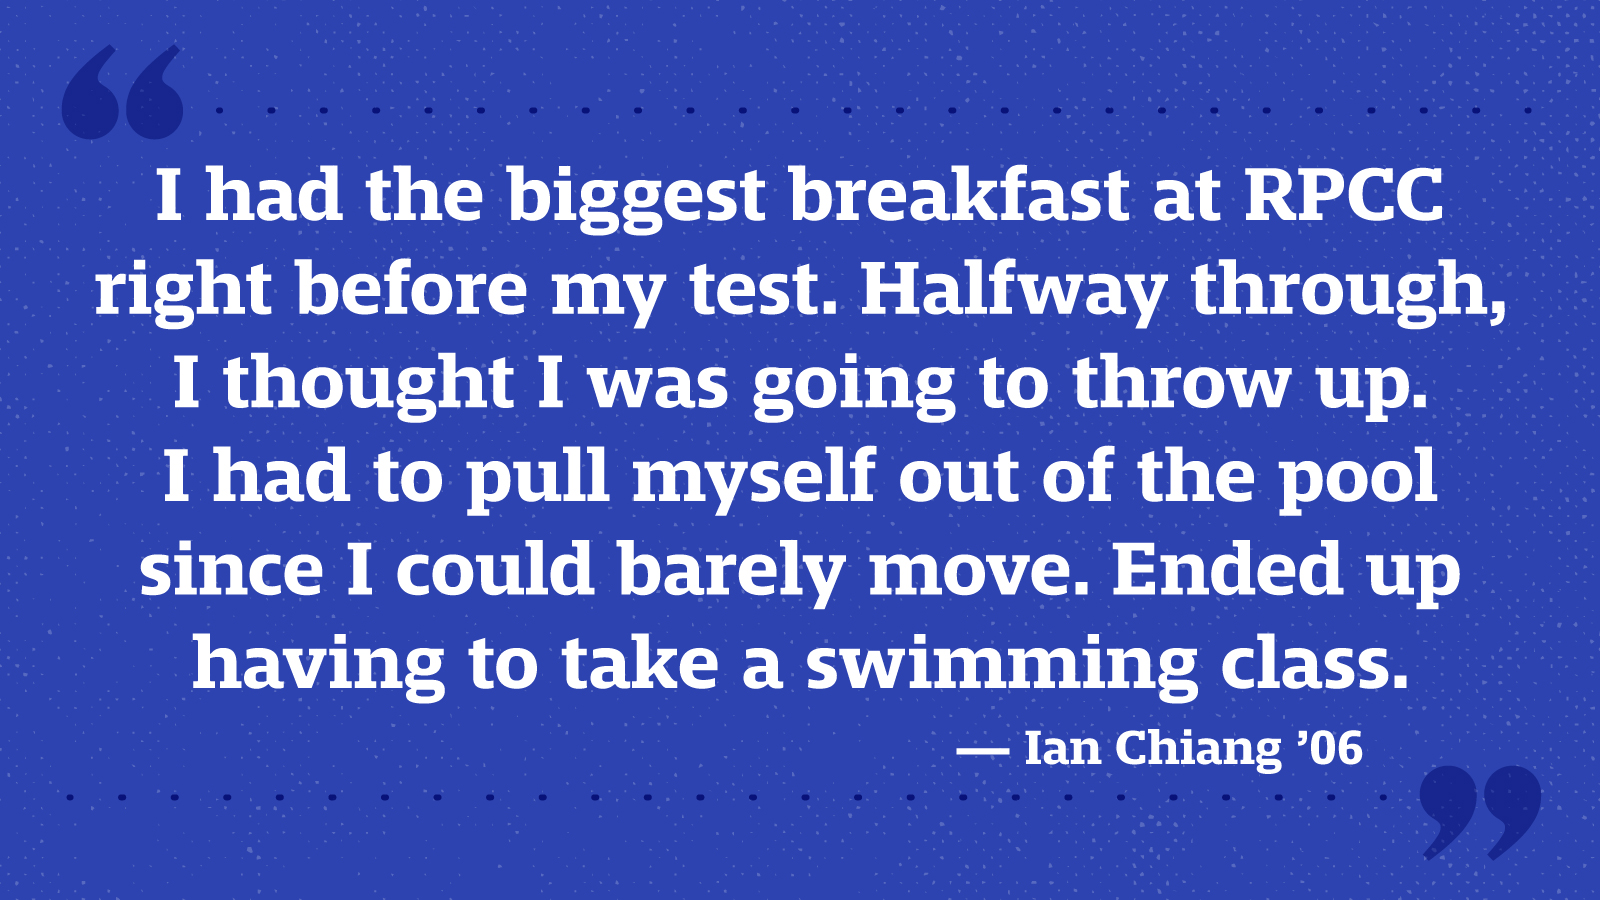 I had the biggest breakfast at RPCC right before my test. Halfway through, I thought I was going to throw up. I had to pull myself out of the pool since I could barely move. Ended up having to take a swimming class. — Ian Chiang ’06